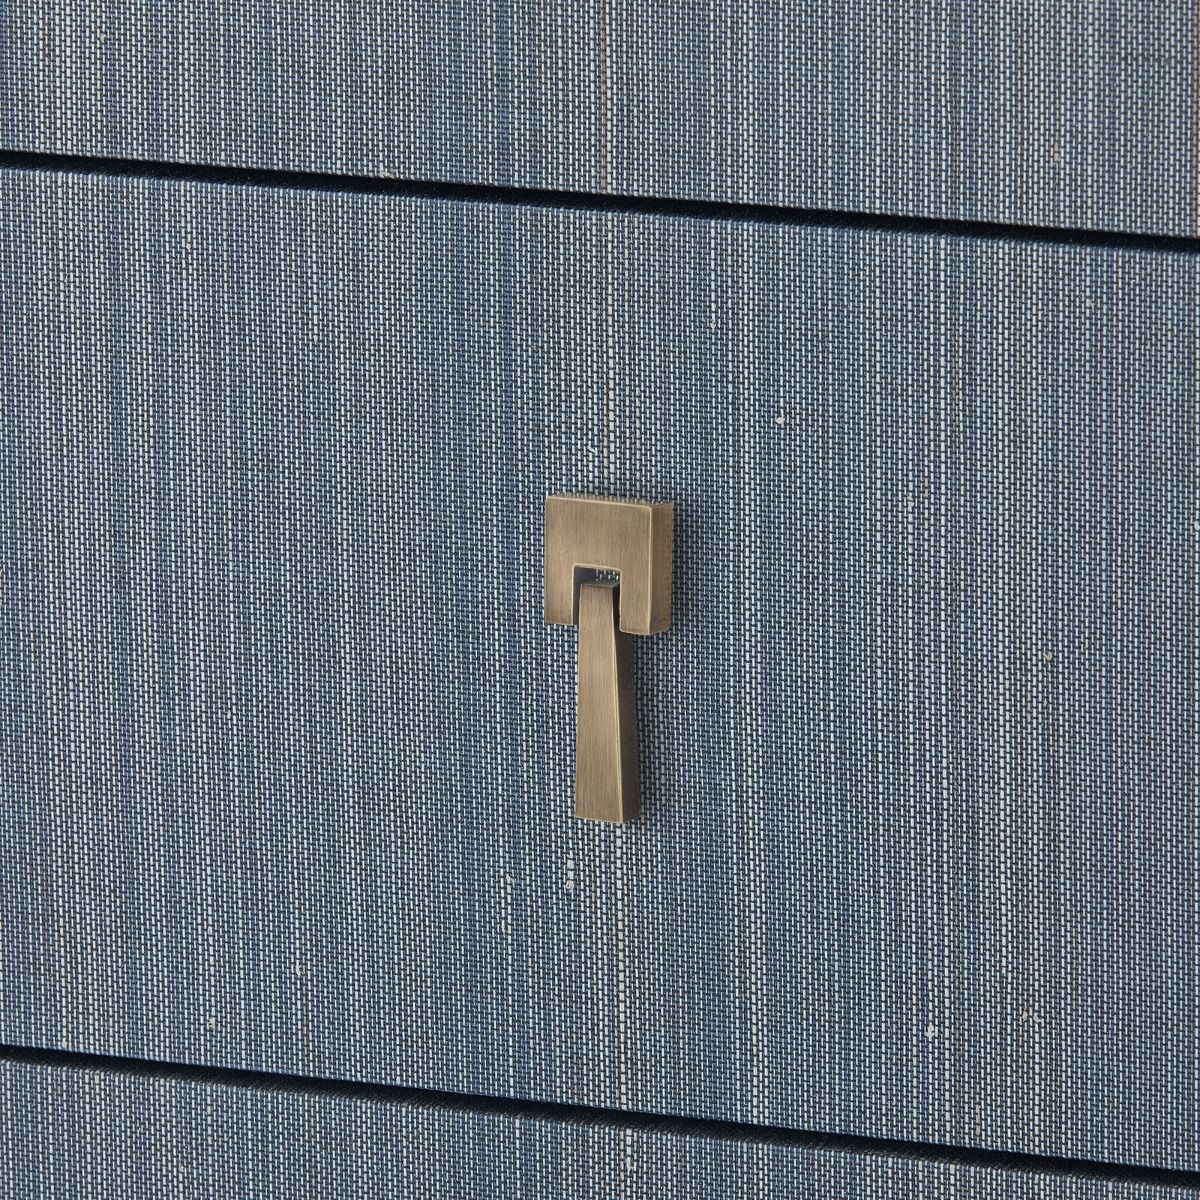 brass pull detail on blue grasscloth-covered chest of drawers